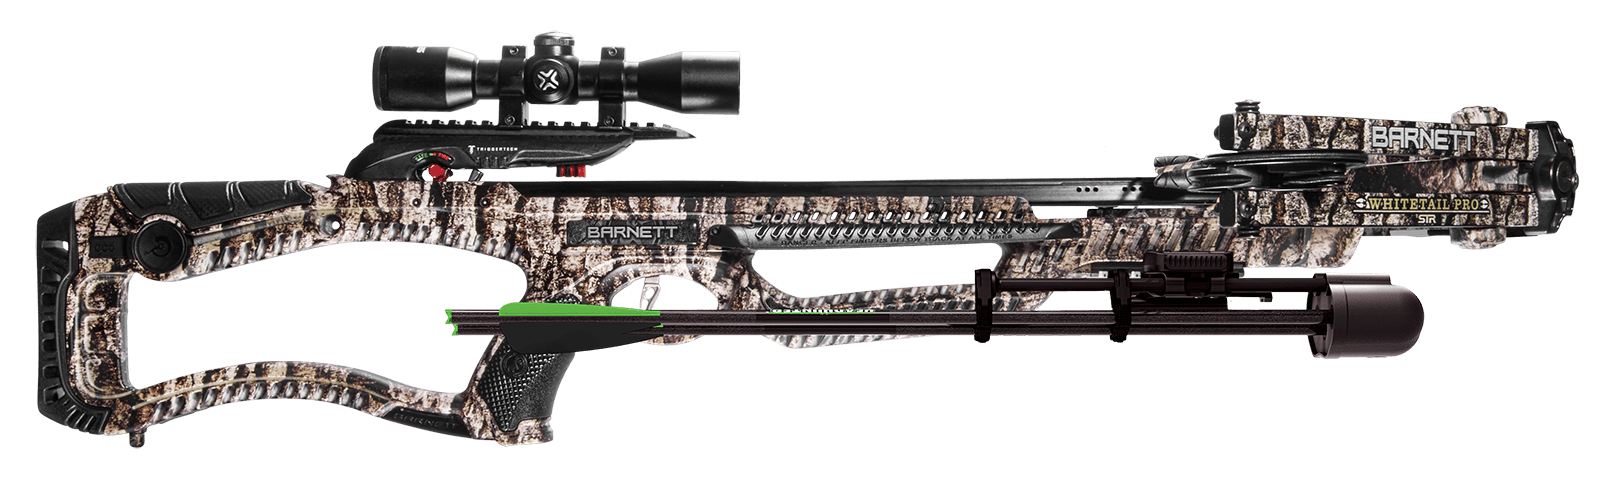 Barnett BAR78004, Whitetail Pro STR with scope and two arrows